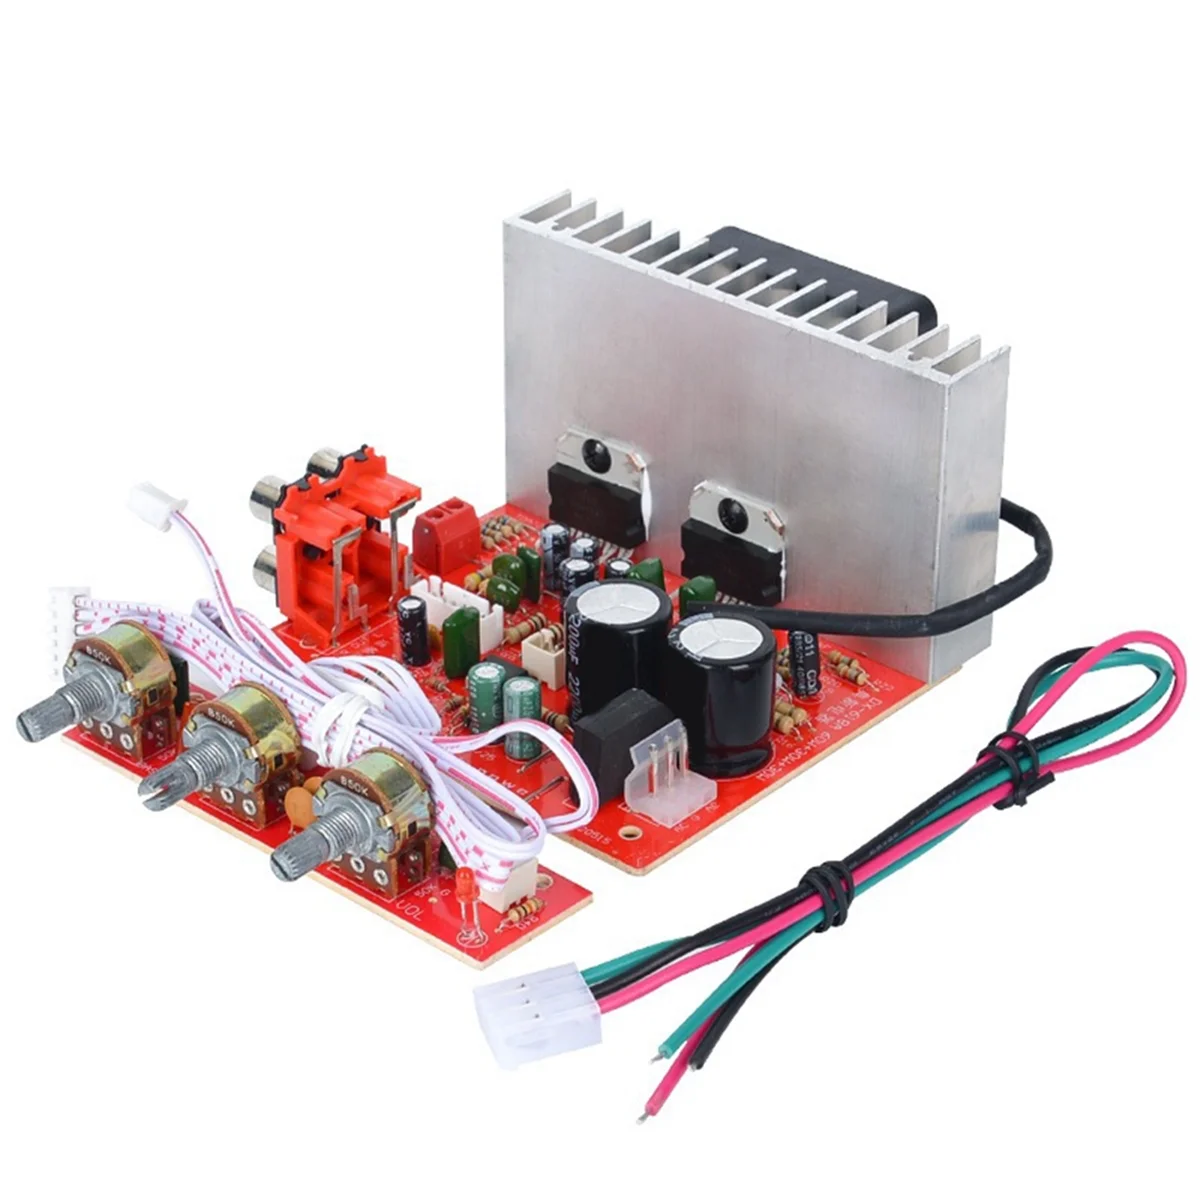 

DX-618 Audio Subwoofer Stereo Amplifier Board 2.1 Channel 60Wx3 DC12-18V Module with Power Cable